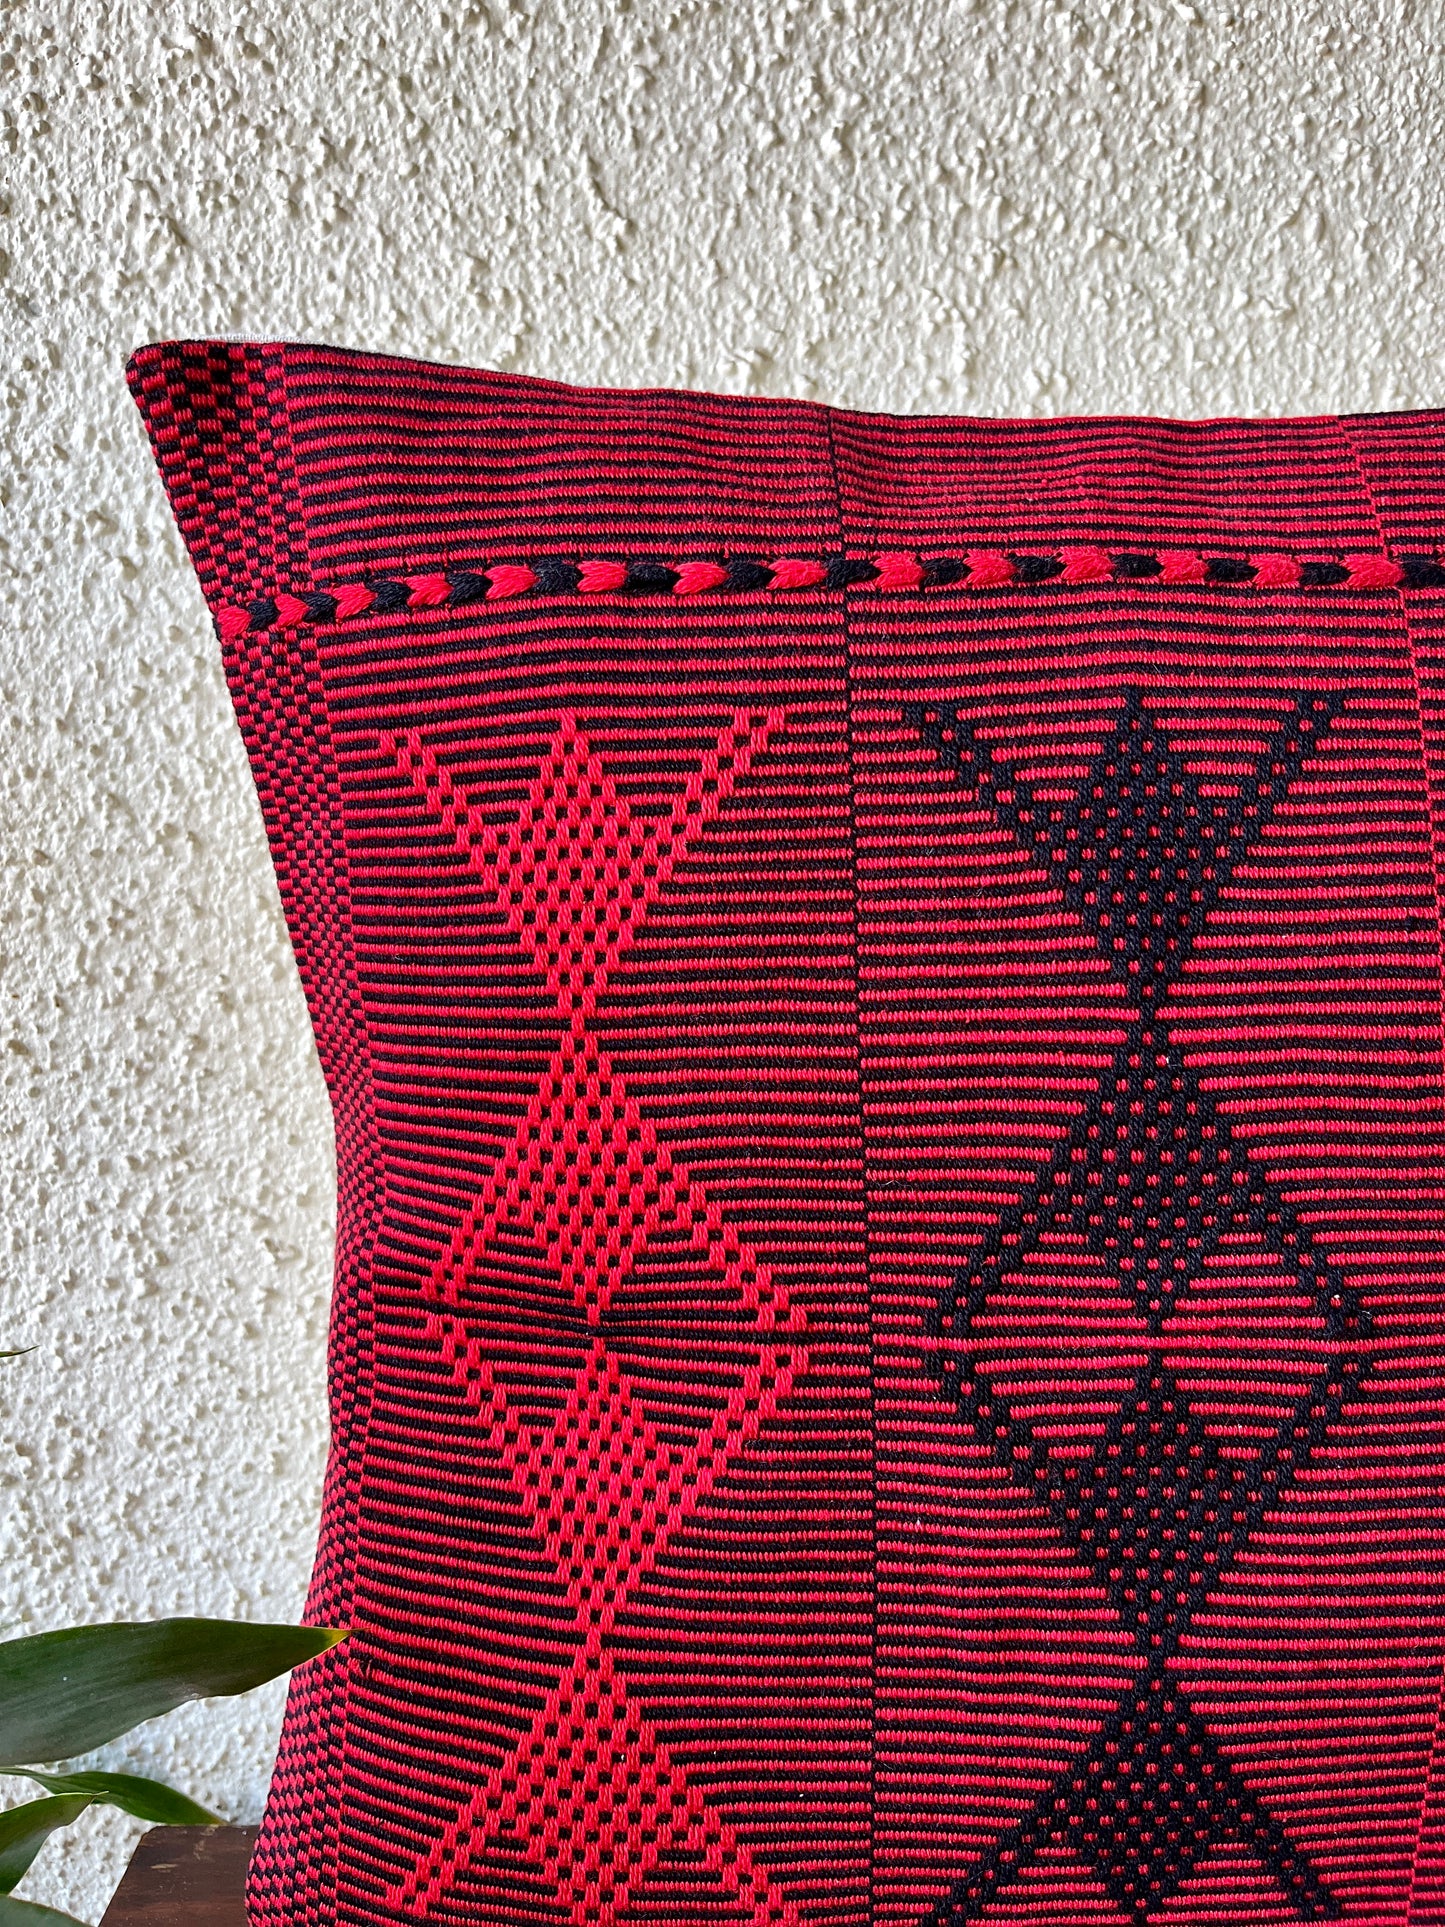 Chizami Weaves - Loin Loom Handwoven Cushion Cover Set in Red with Black Motifs (Set of 4)